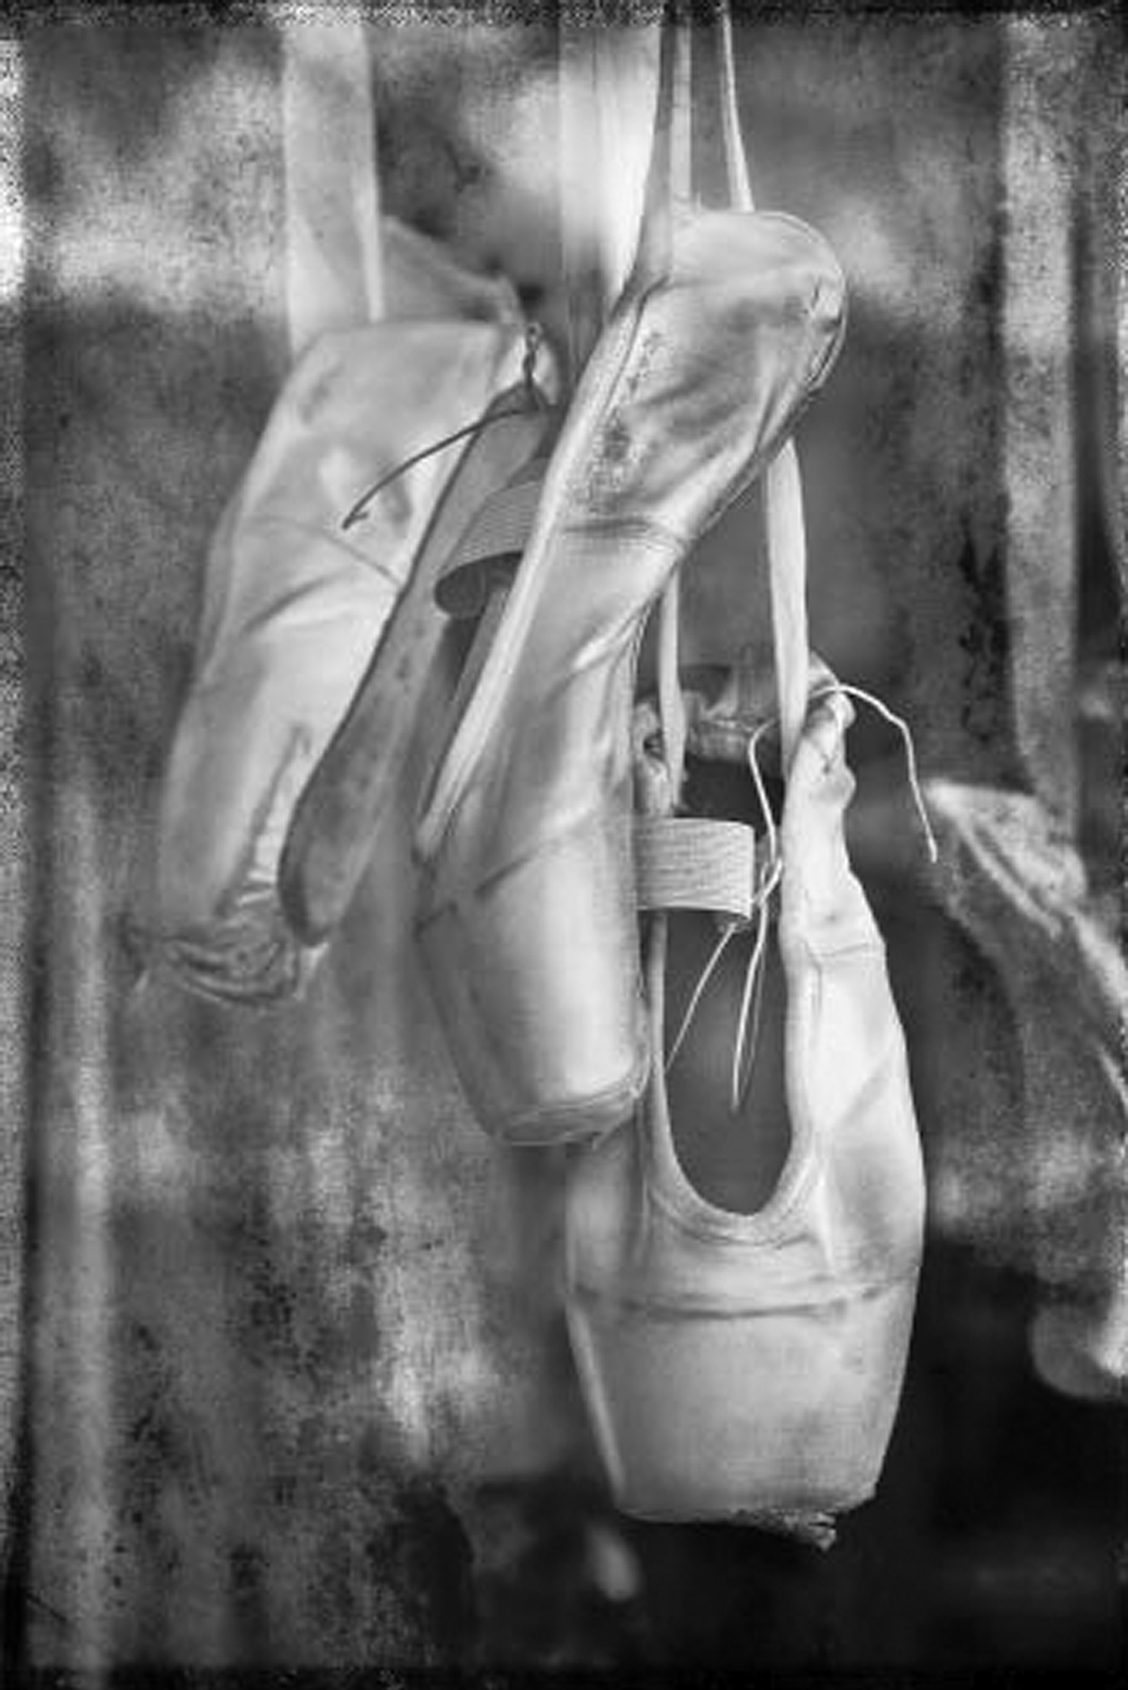 Worn ballet shoes of different sizes are seen hanging.